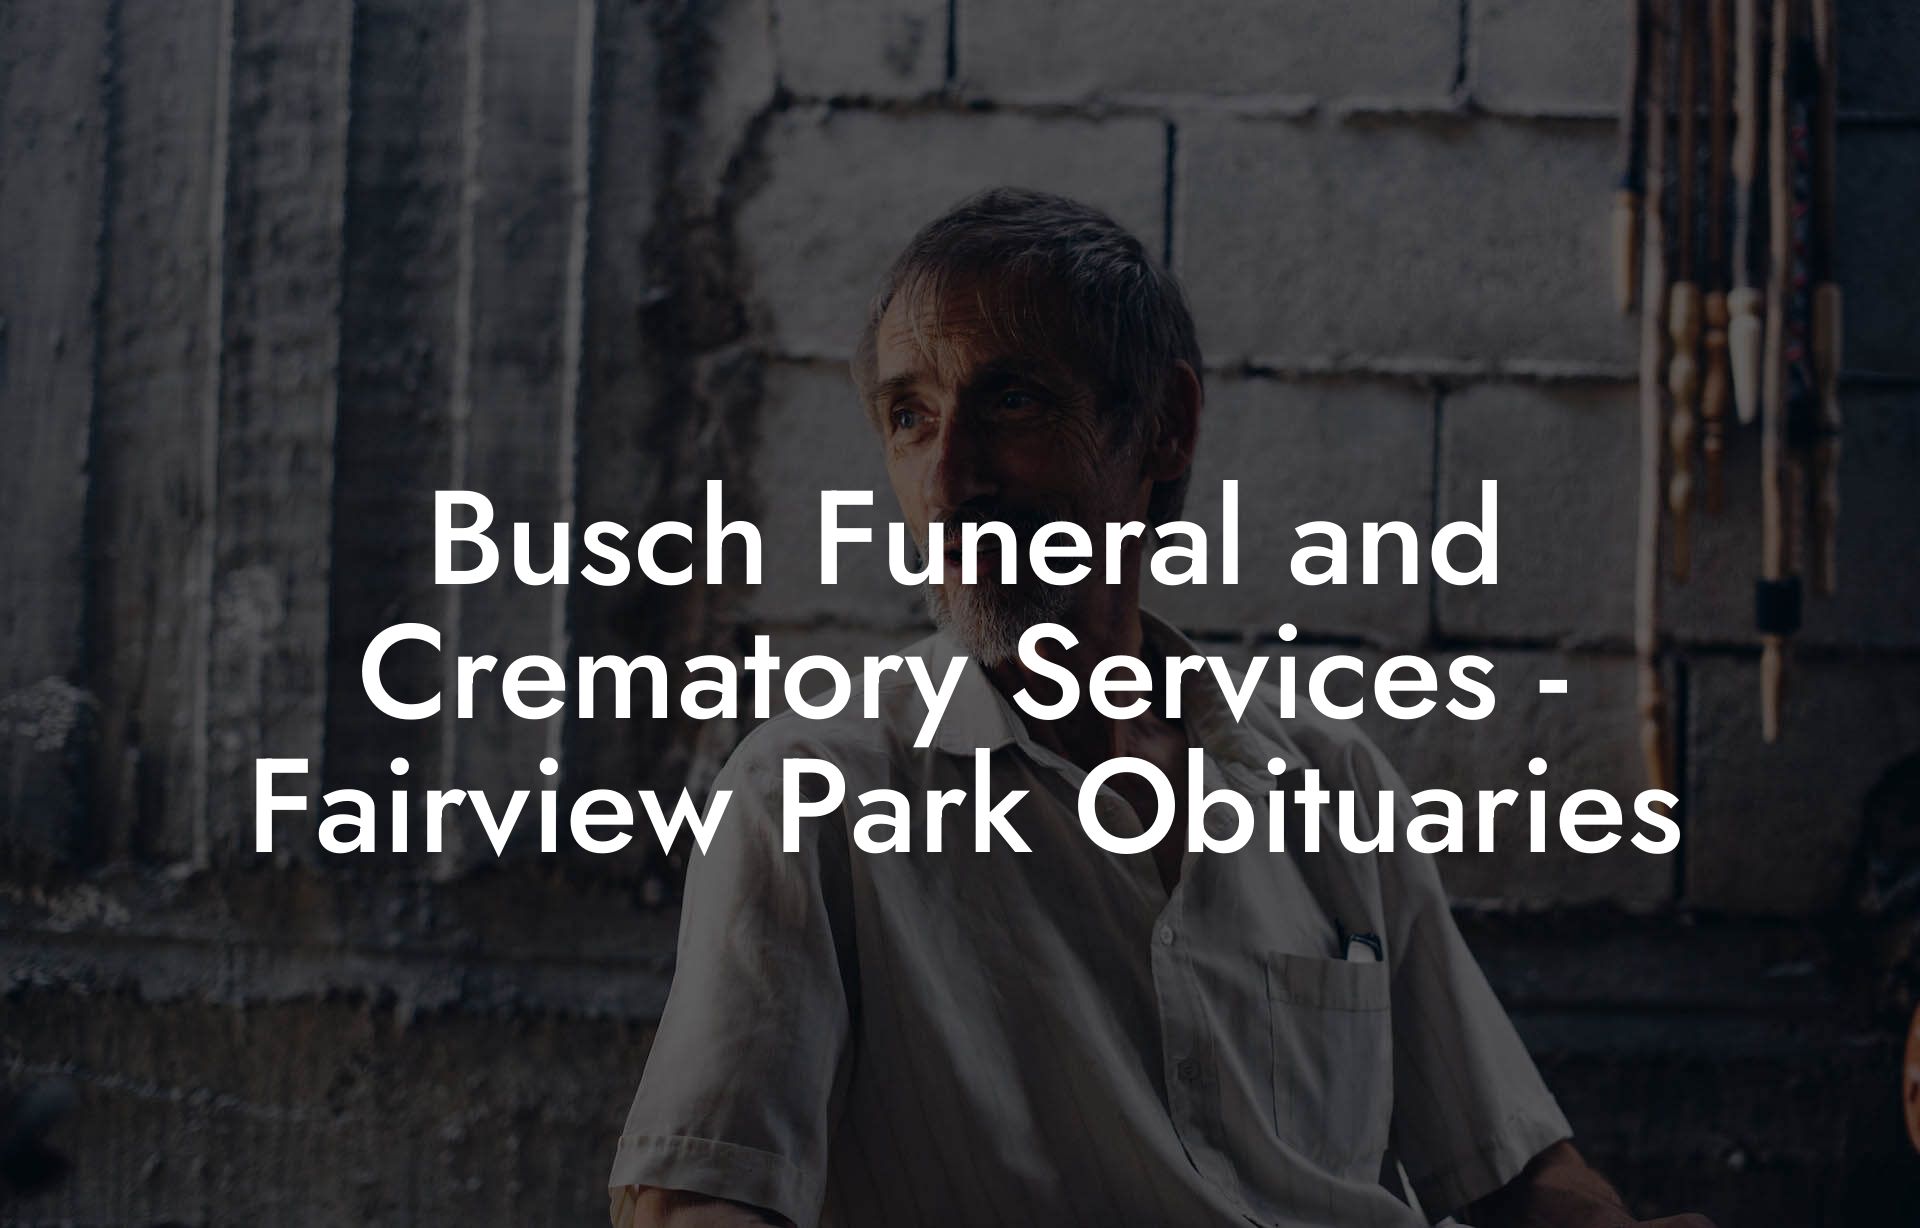 Busch Funeral and Crematory Services - Fairview Park Obituaries